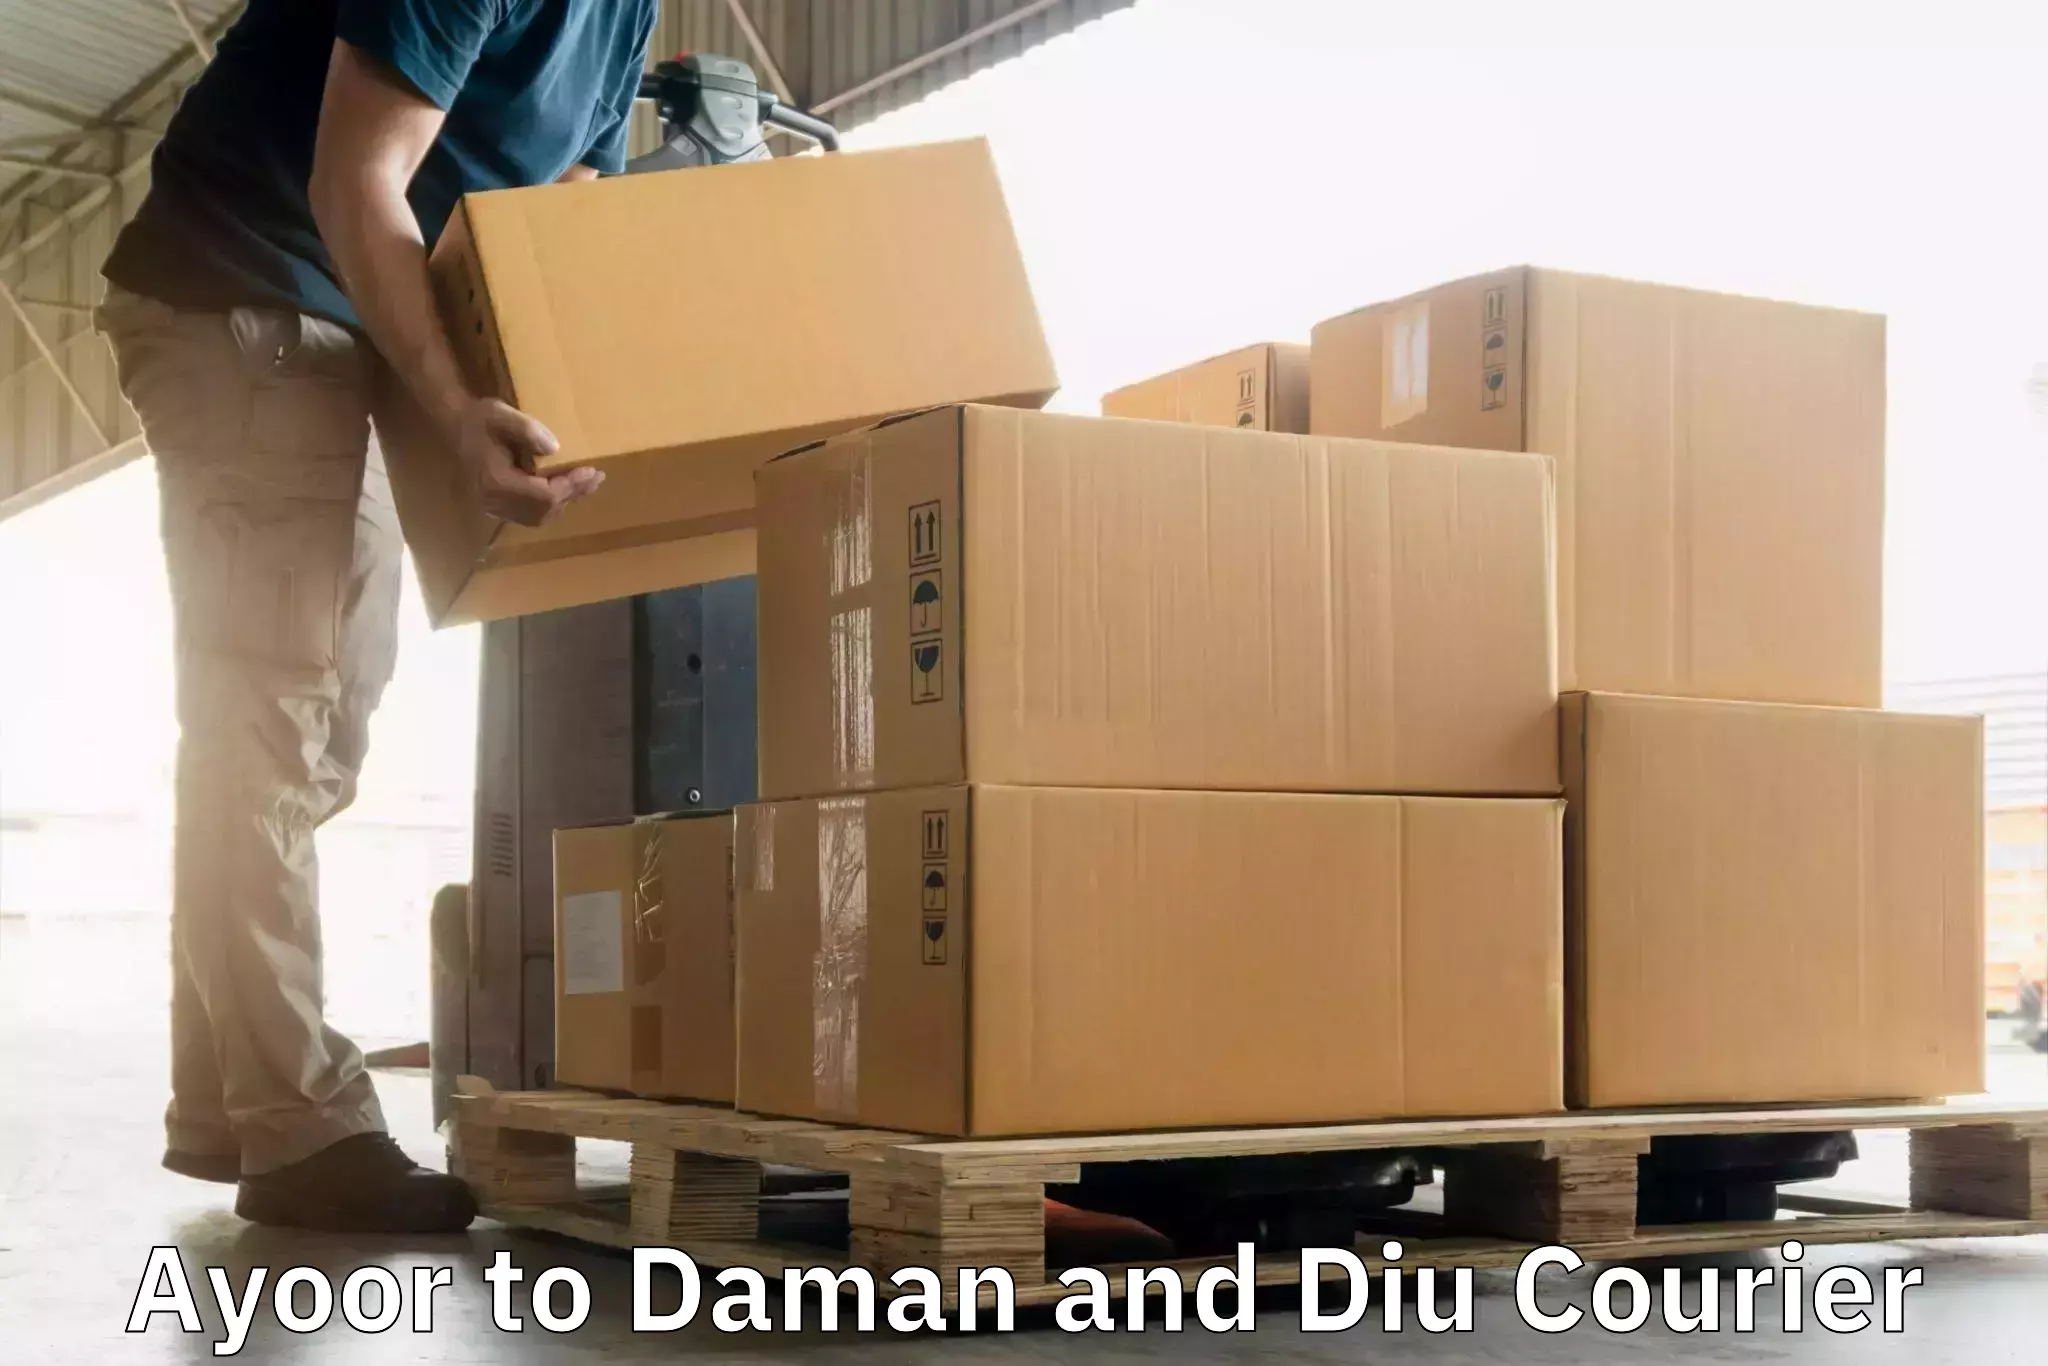 Courier dispatch services Ayoor to Daman